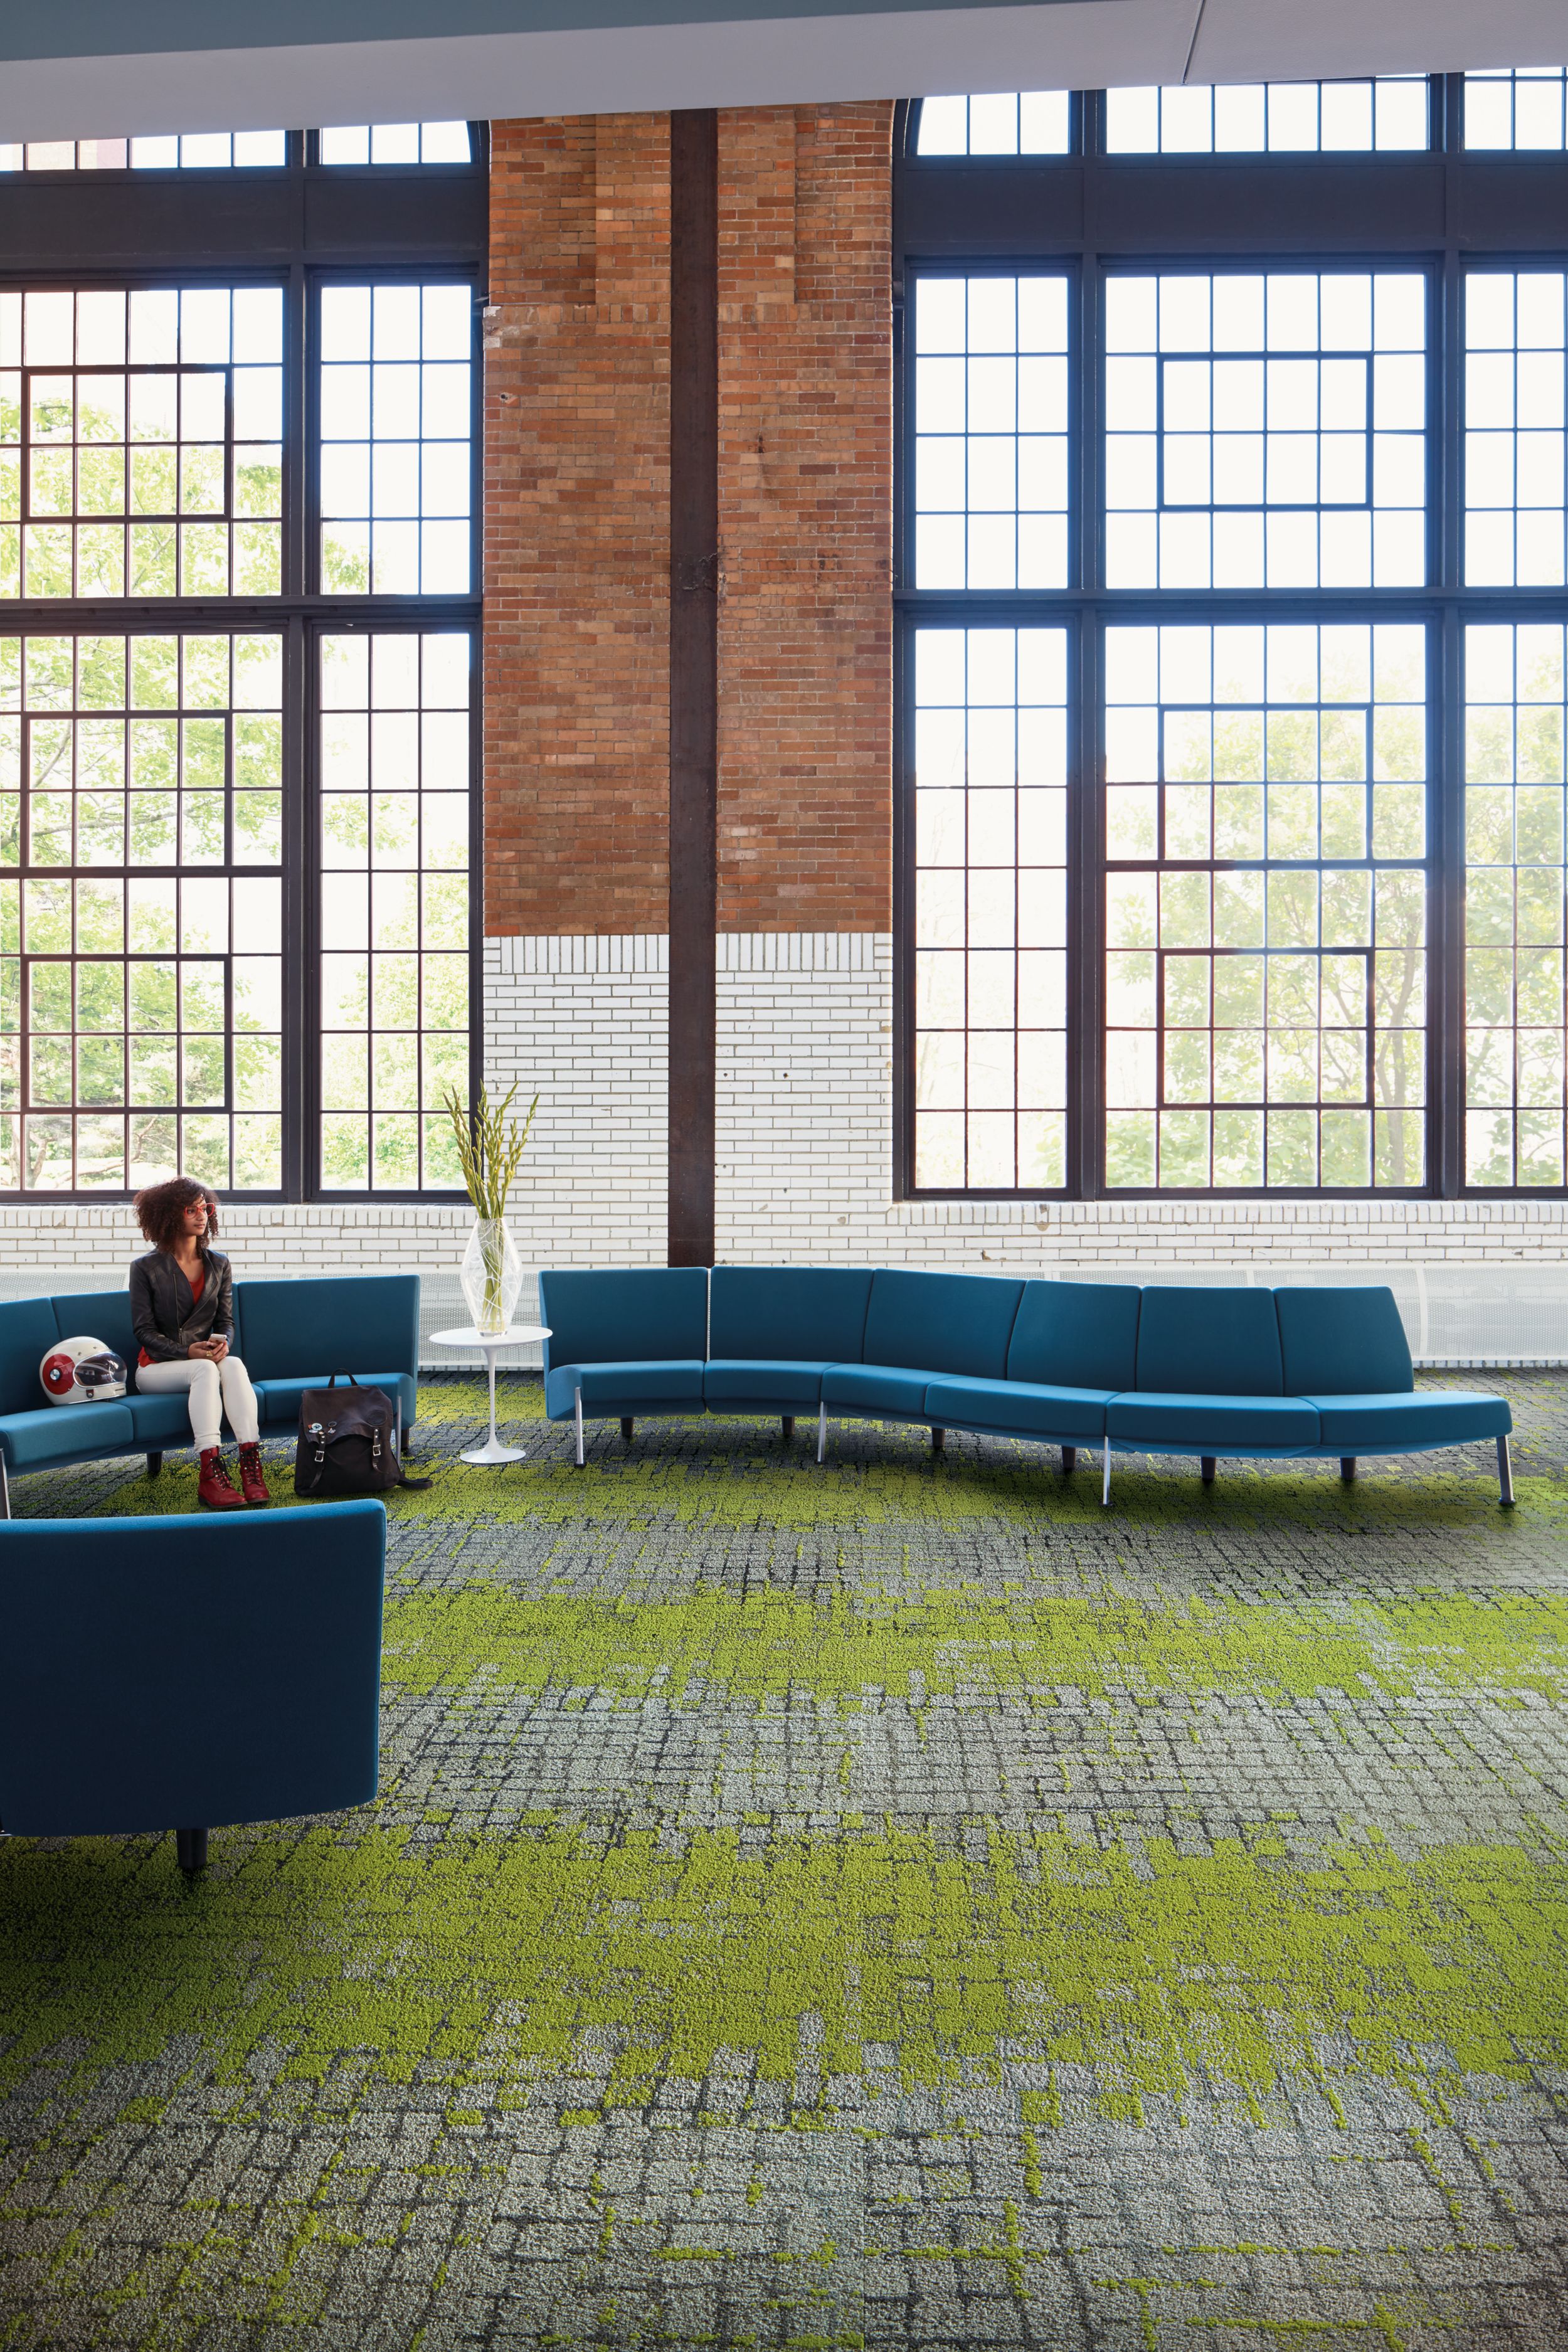 Interface Moss and Moss in Stone carpet tile in seating area with blue couches and women seated Bildnummer 4